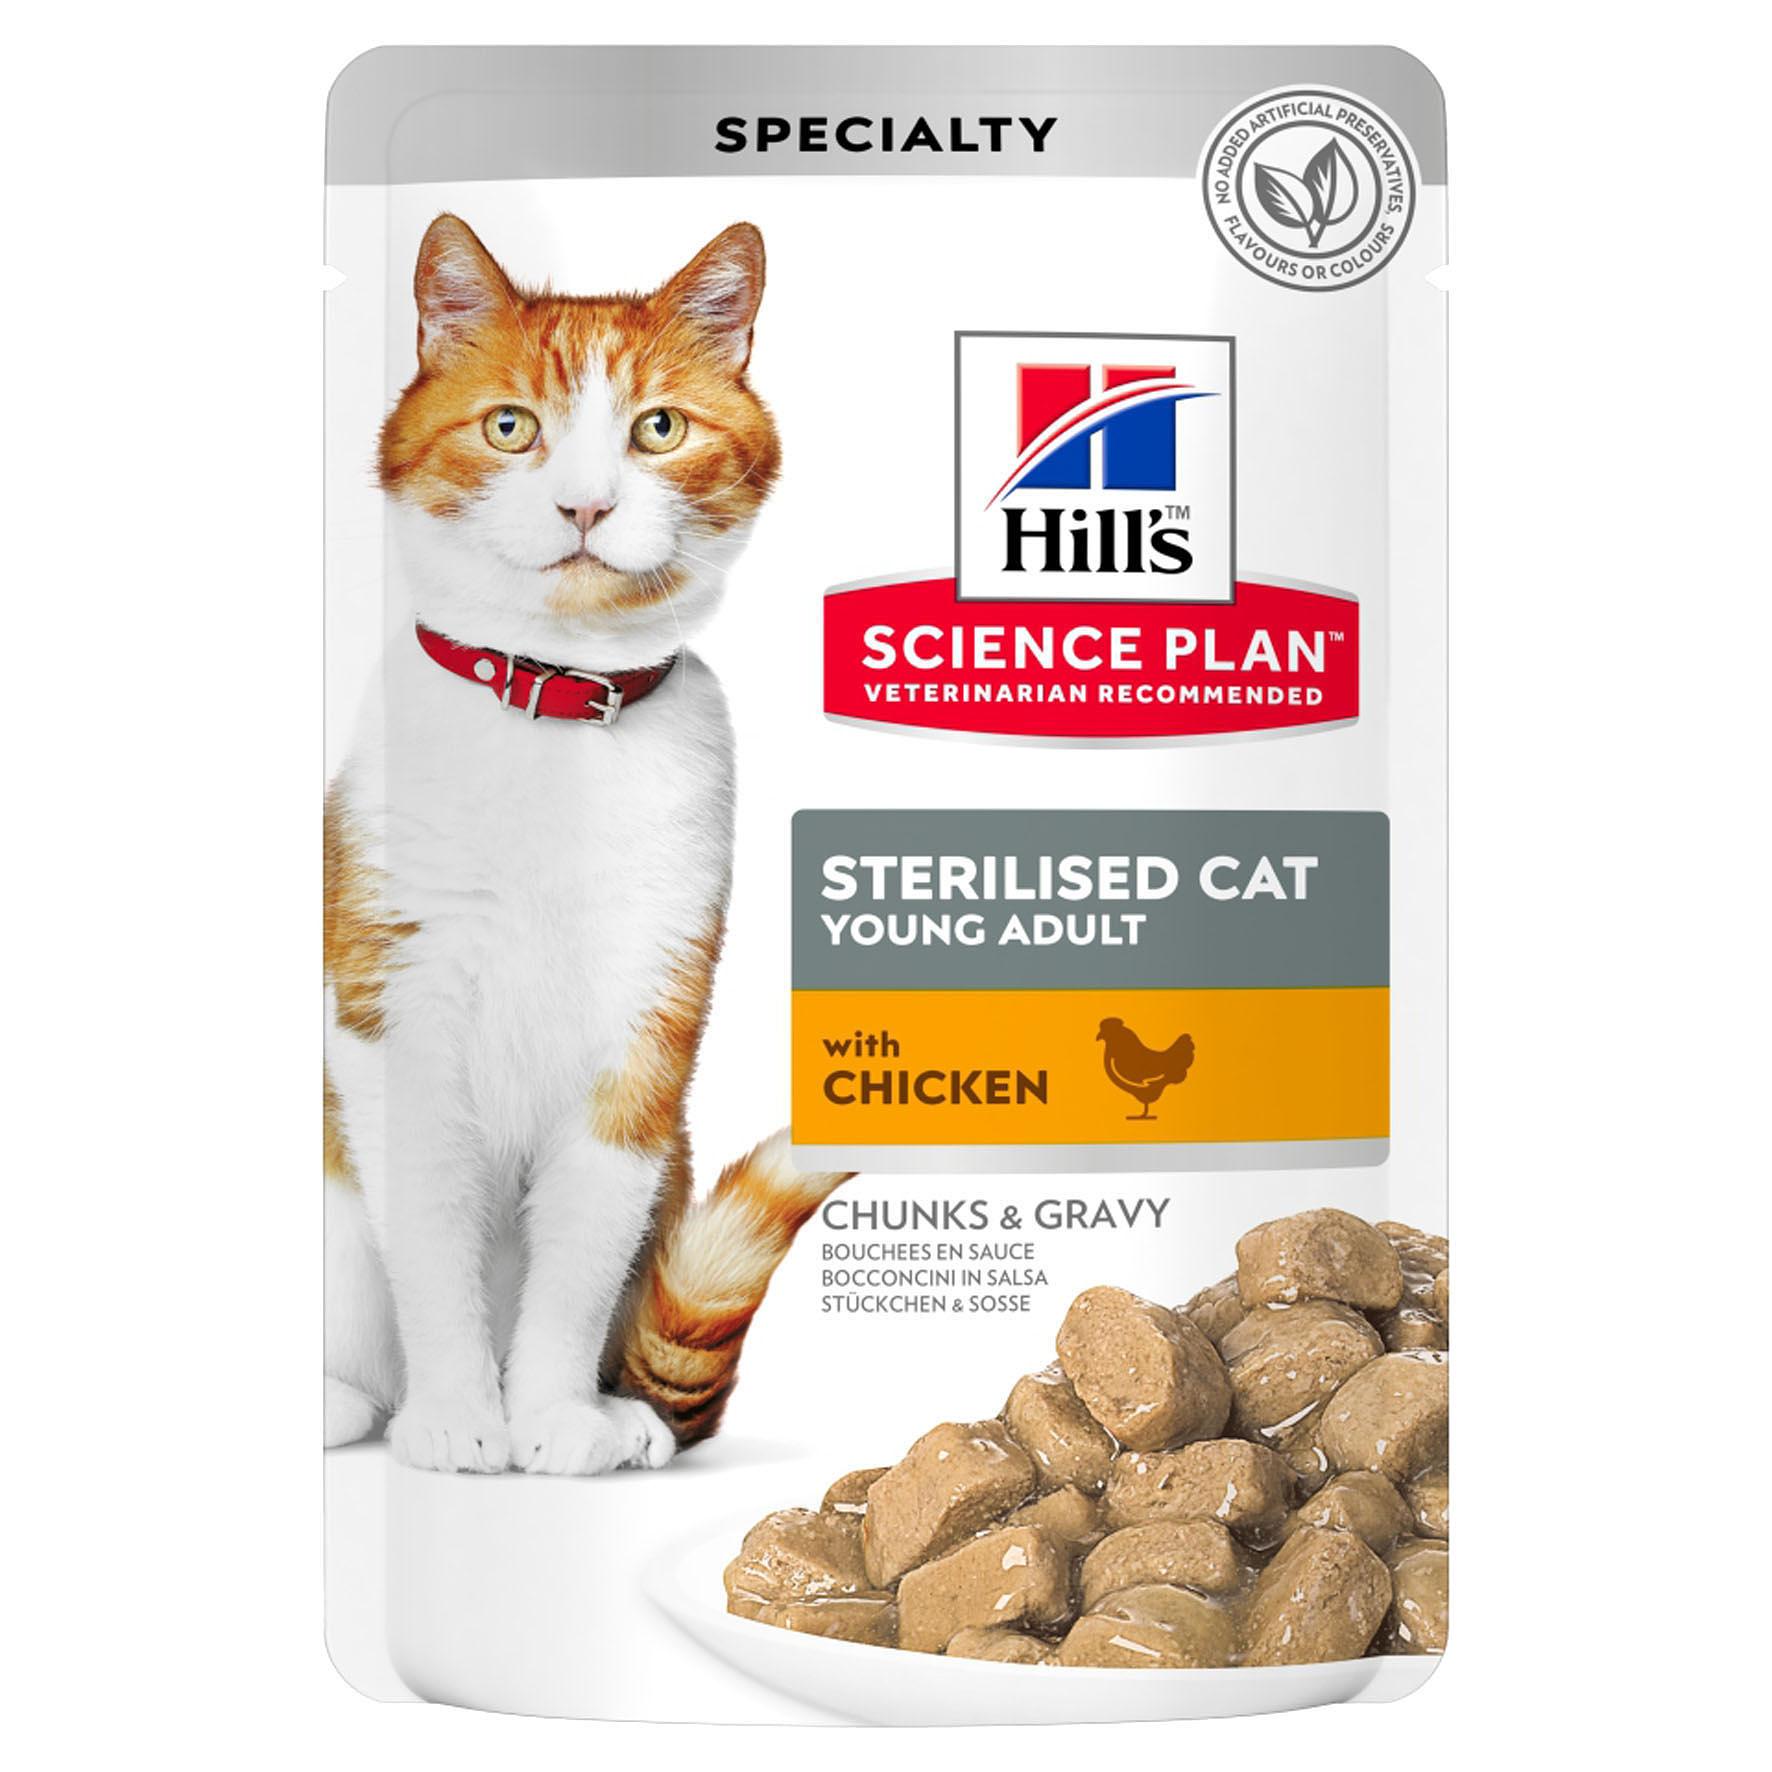 Hill's Science Plan Sterilised Cat Young Adult